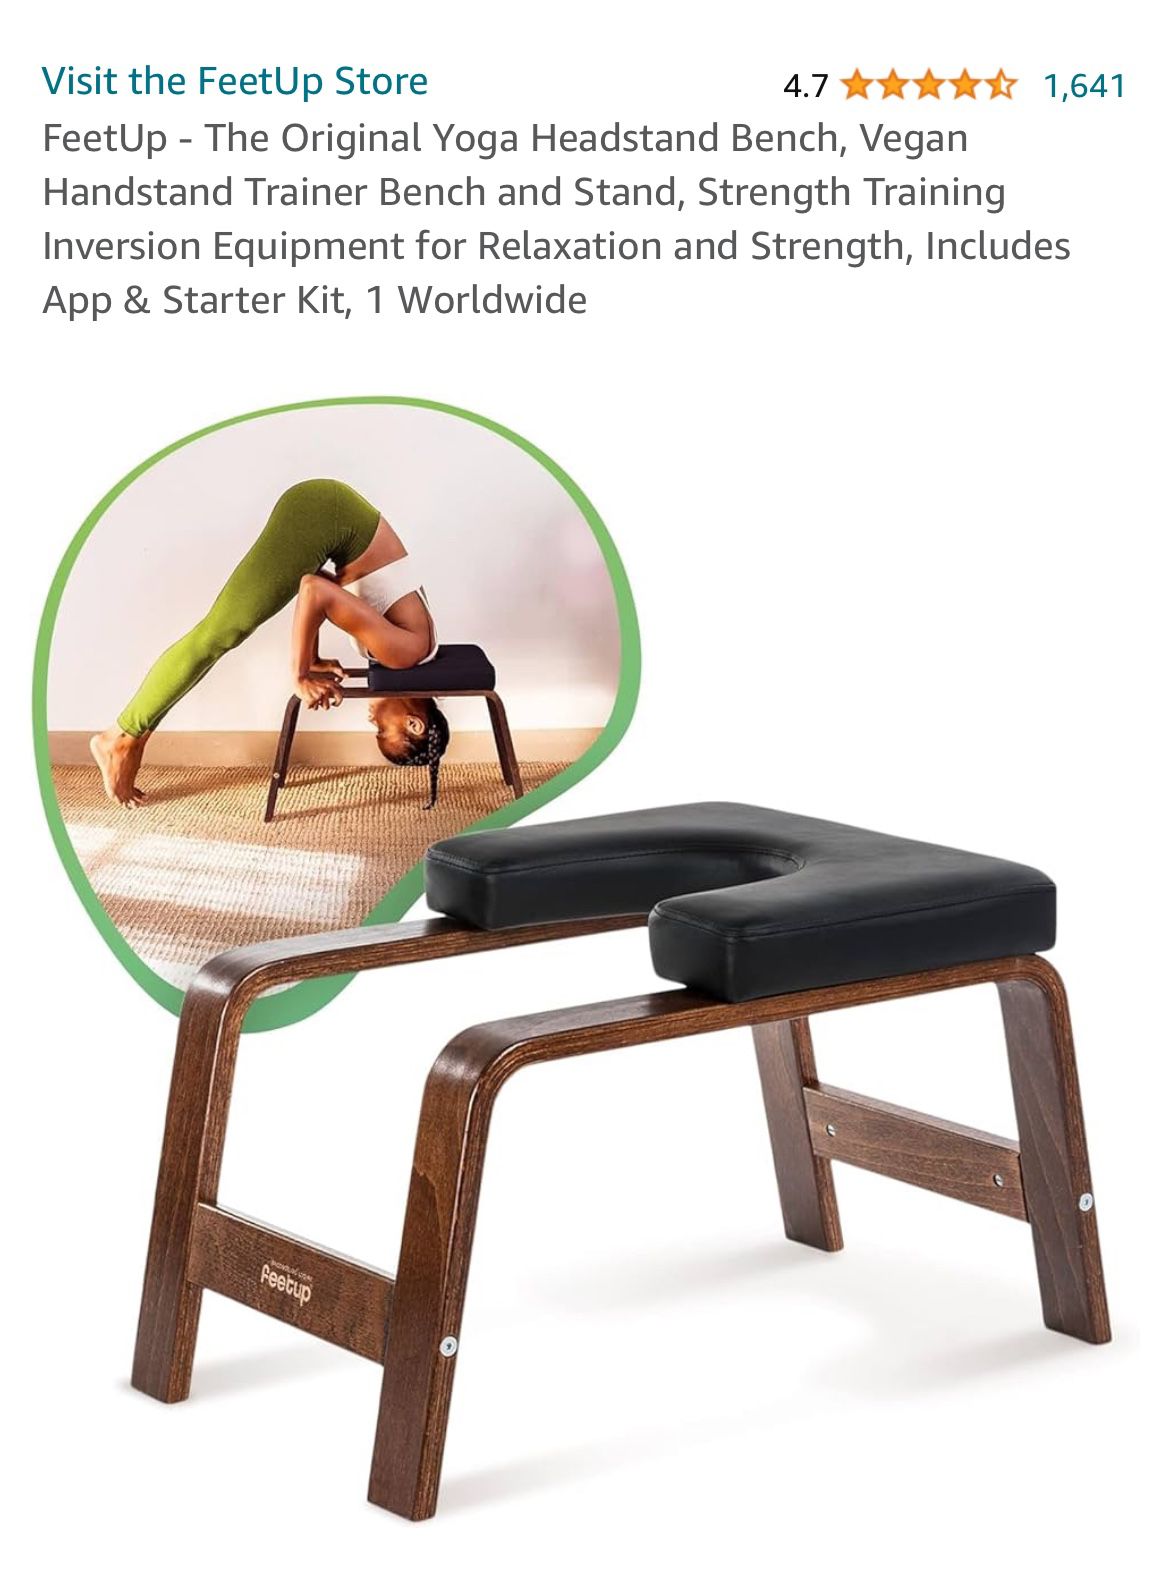 FeetUp - The Original Yoga Headstand Bench, Vegan Handstand Trainer Bench and Stand, Strength Training Inversion Equipment for Relaxation and Strength